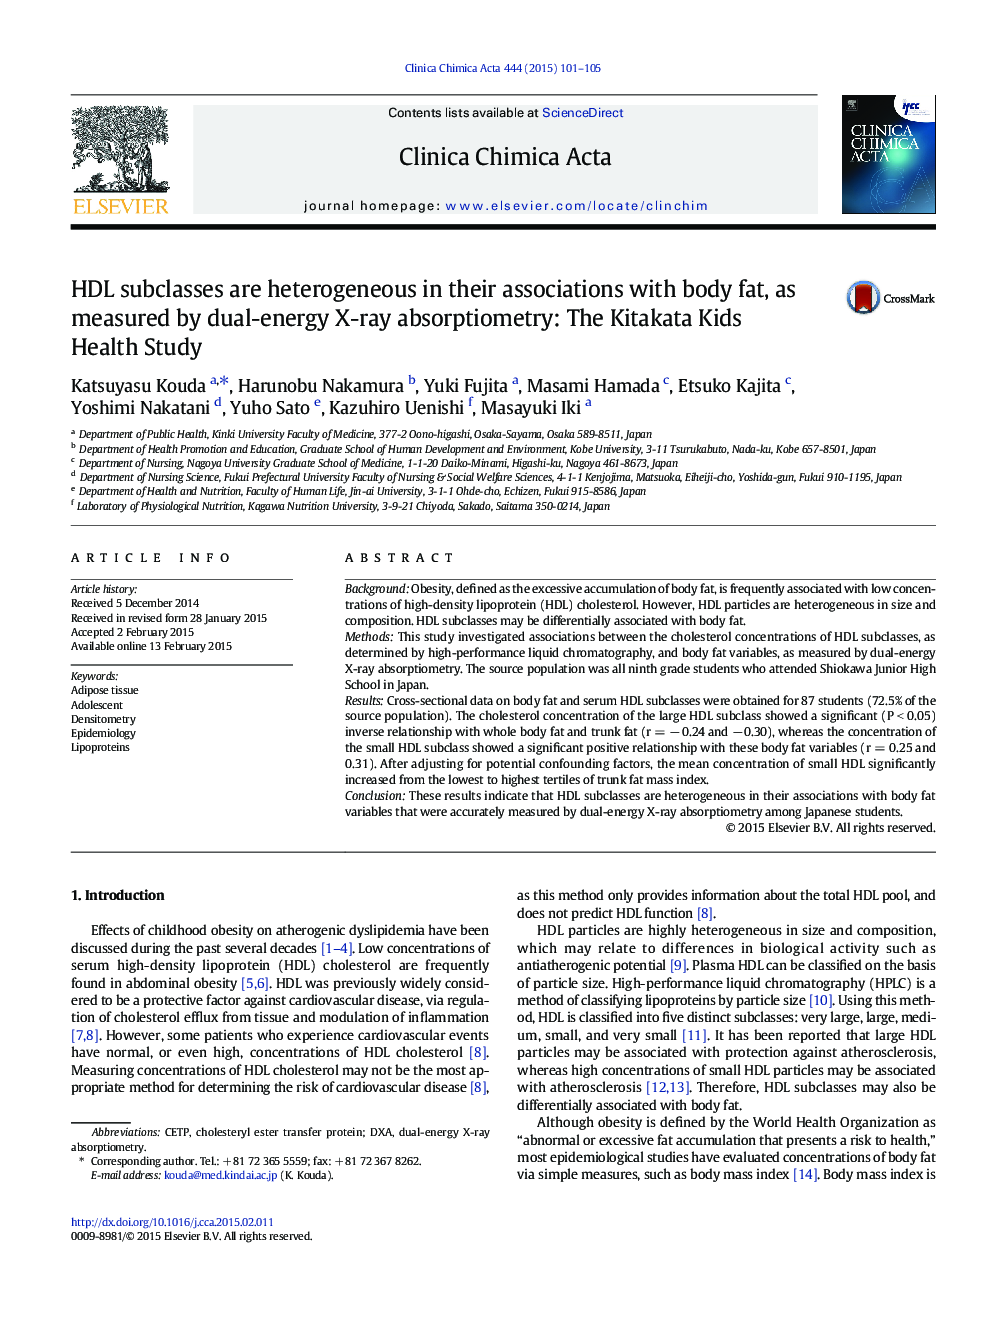 HDL subclasses are heterogeneous in their associations with body fat, as measured by dual-energy X-ray absorptiometry: The Kitakata Kids Health Study